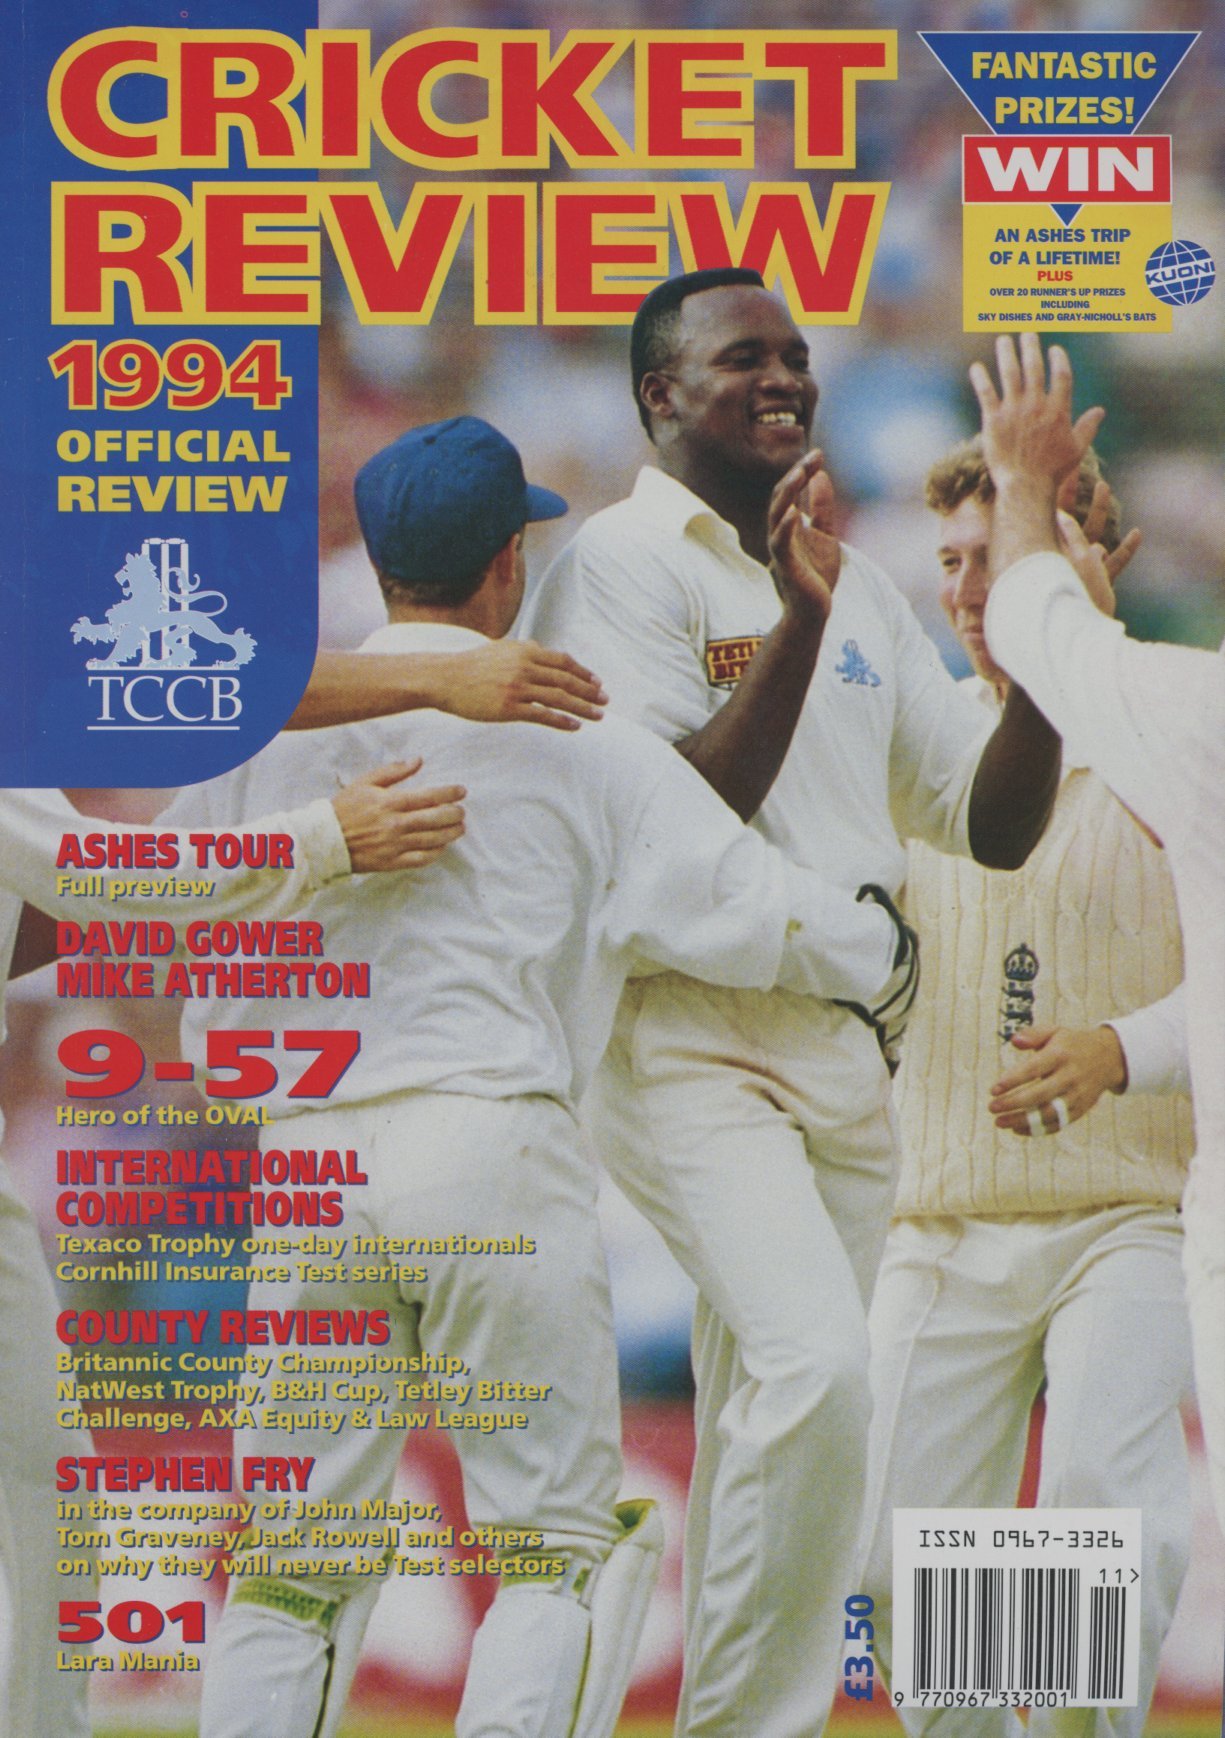 CRICKET REVIEW - 1994 OFFICIAL REVIEW - Cricket Brochures & Booklets ...